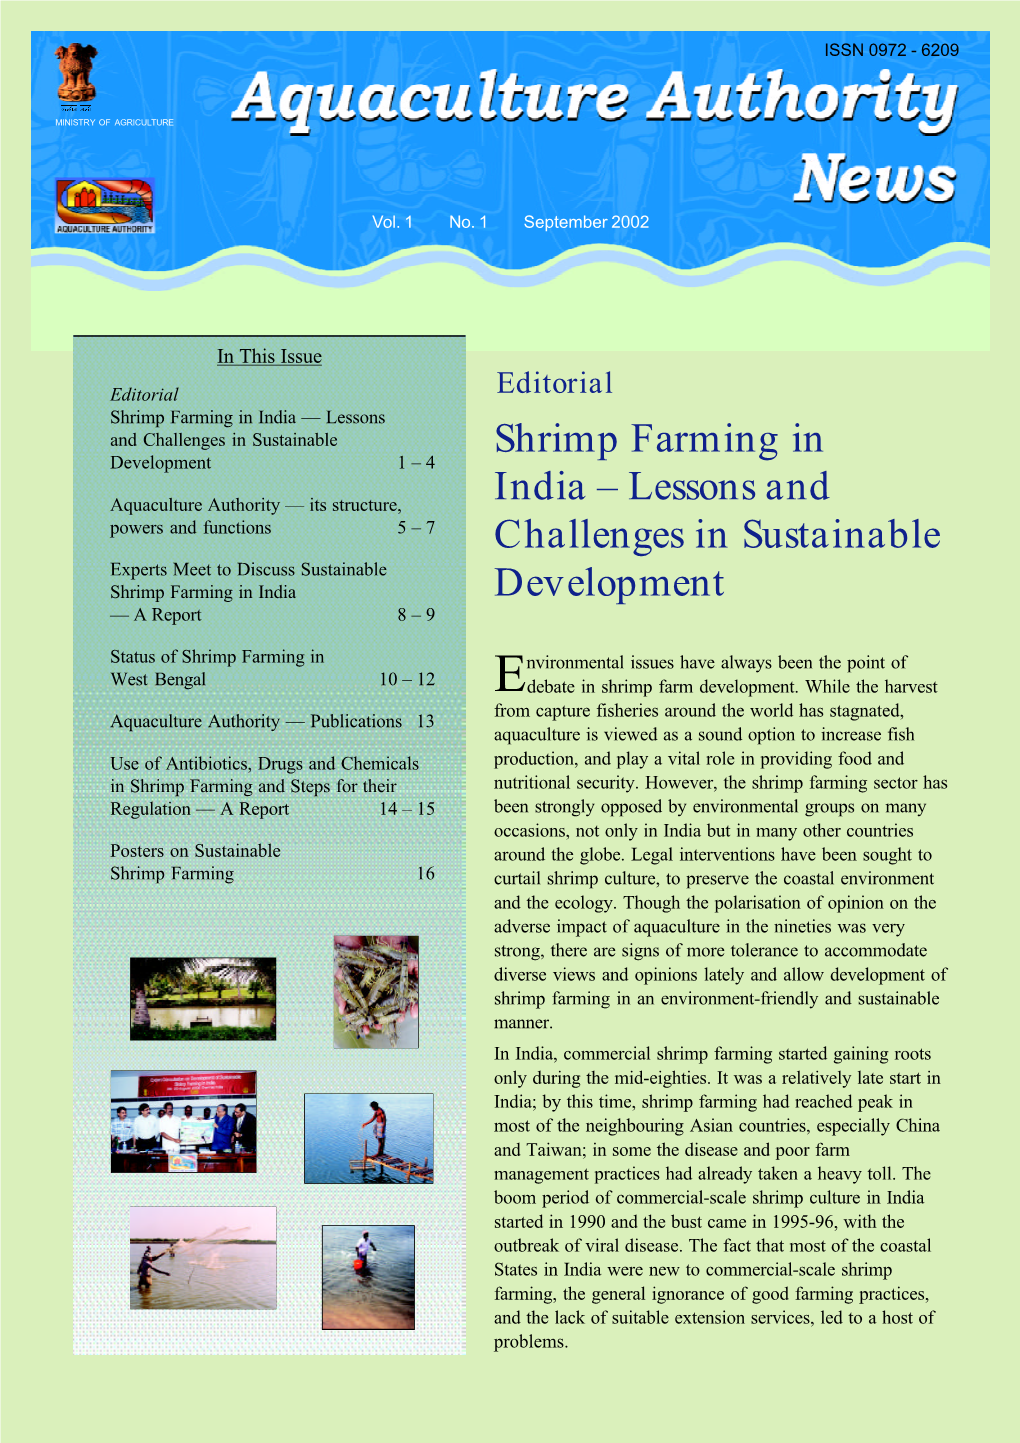 Shrimp Farming in India – Lessons and Challenges in Sustainable